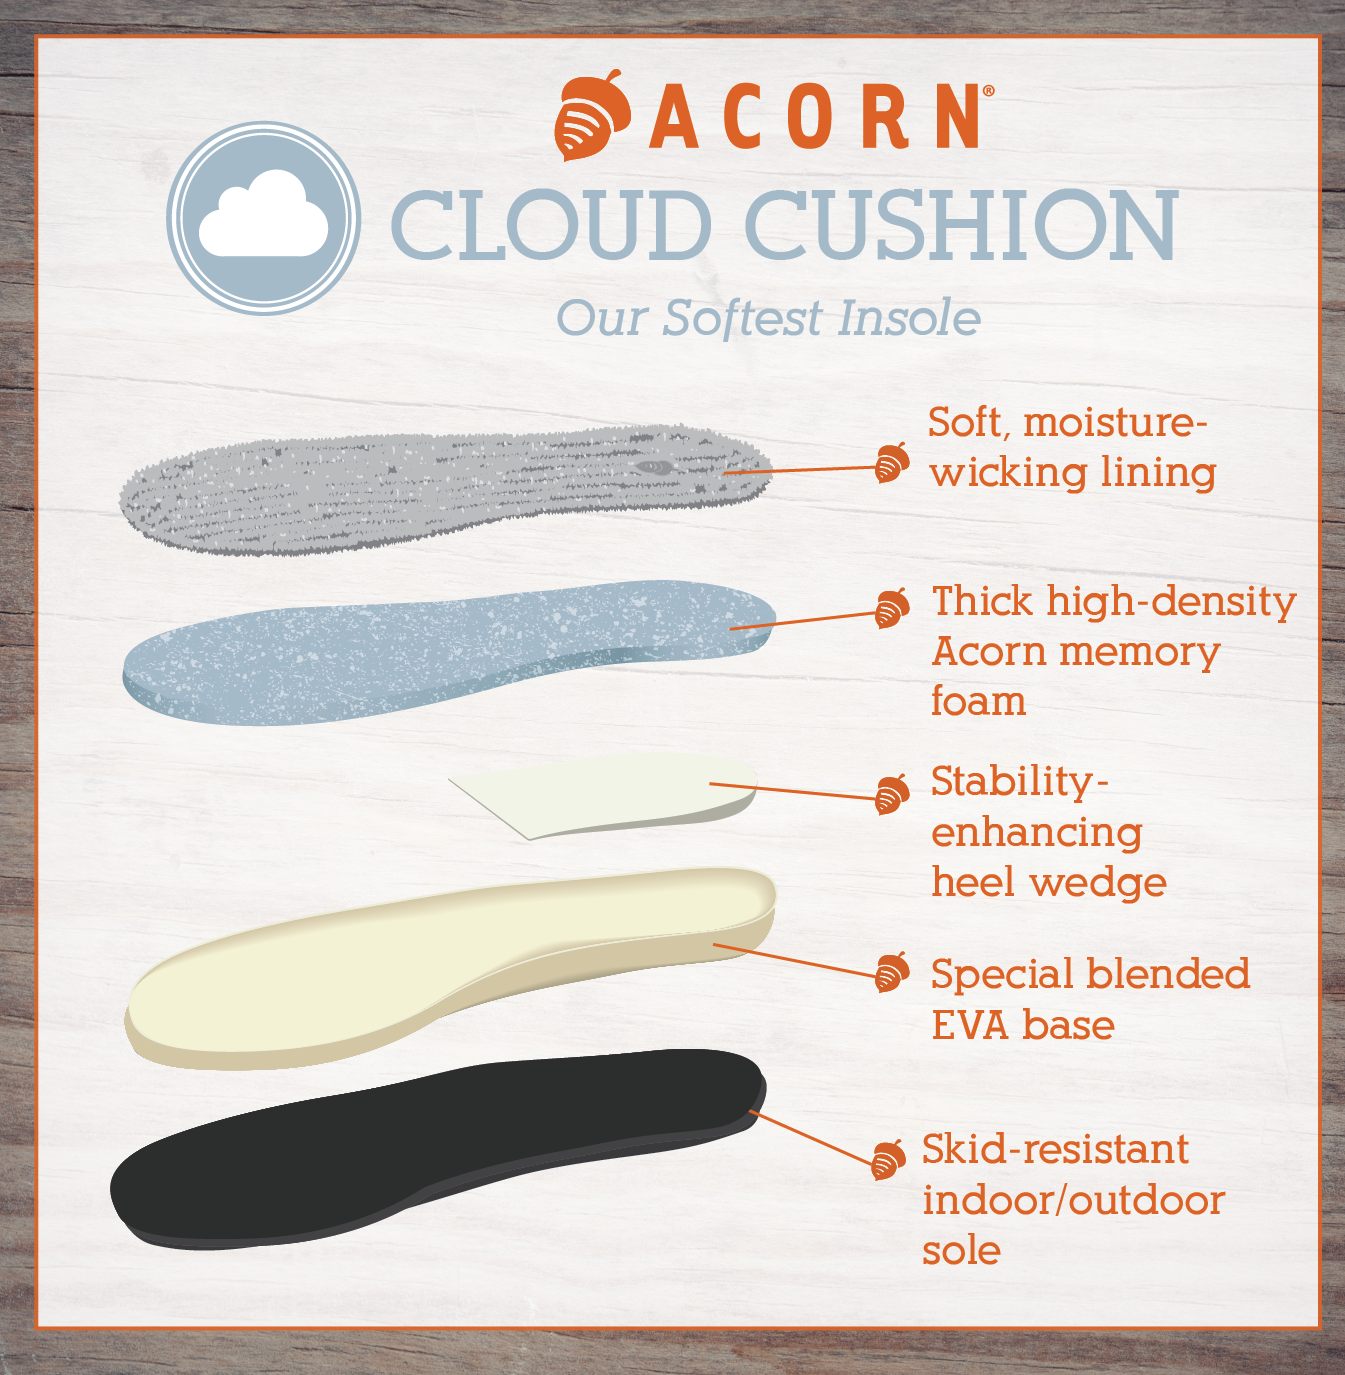 Acorn could cushion Infographic 